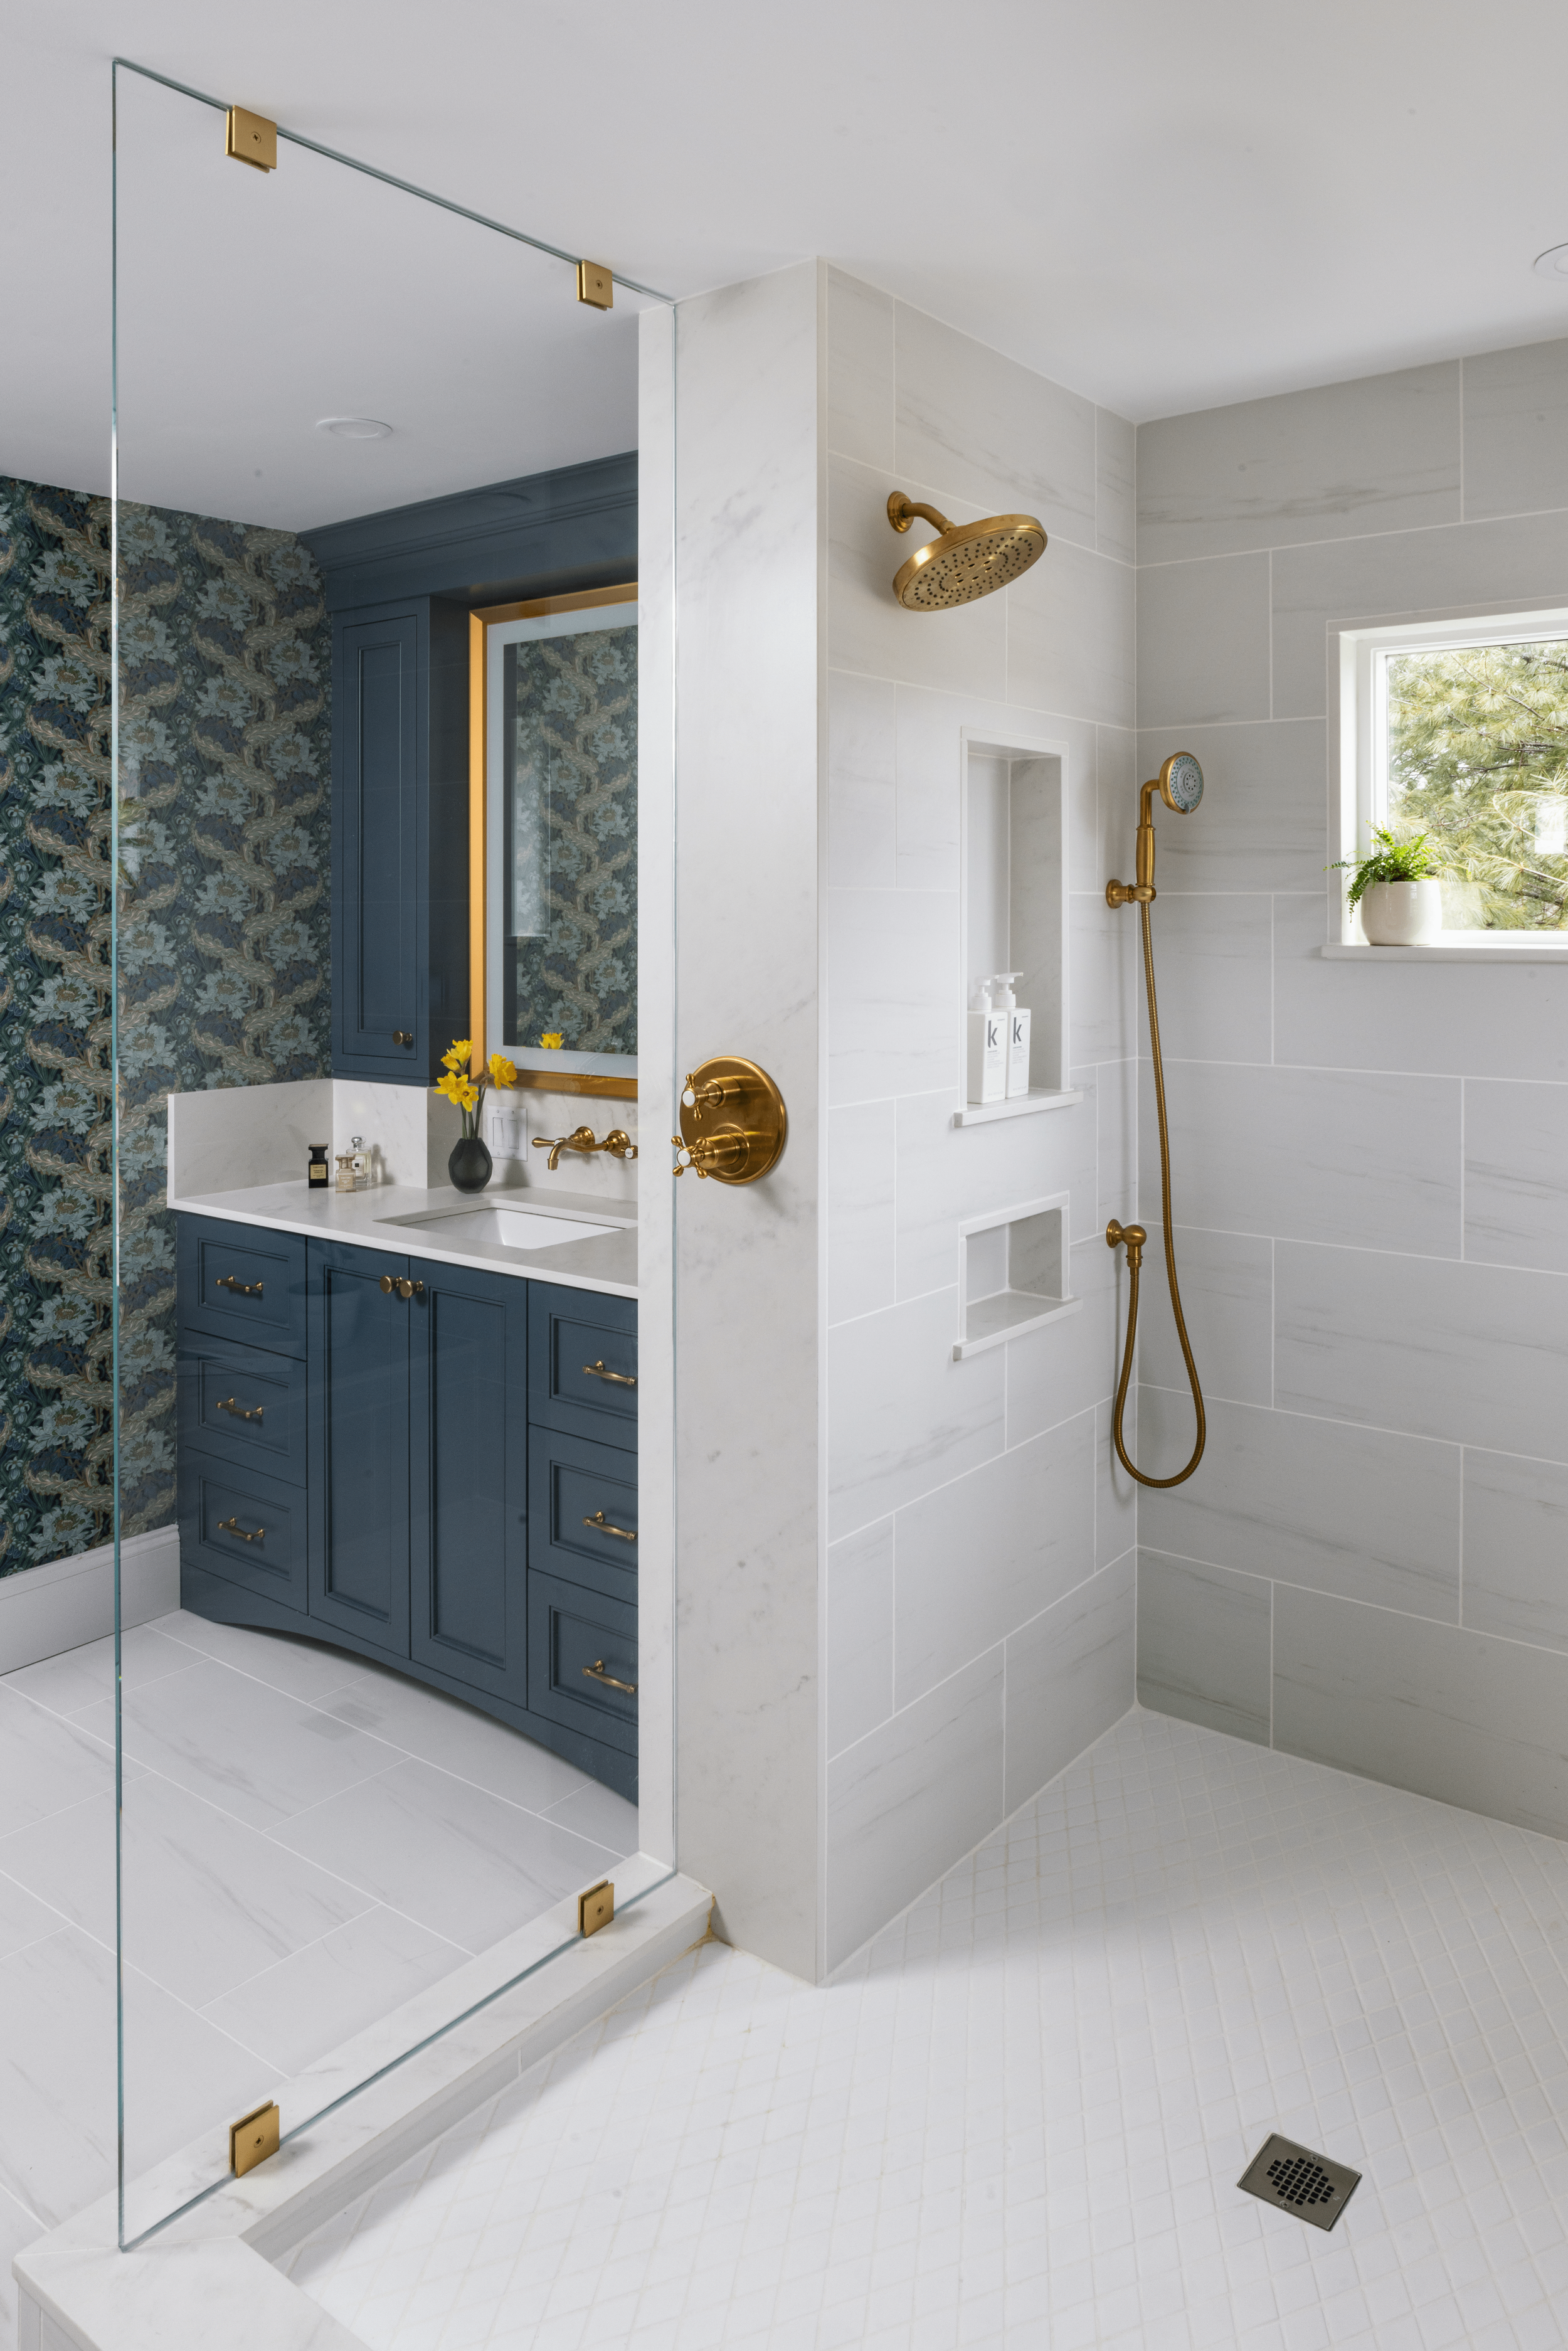 Teal Appeal Primary Bath Shower View Sudbury MA KITCHENVISIONS residential kitchen and bath design.png